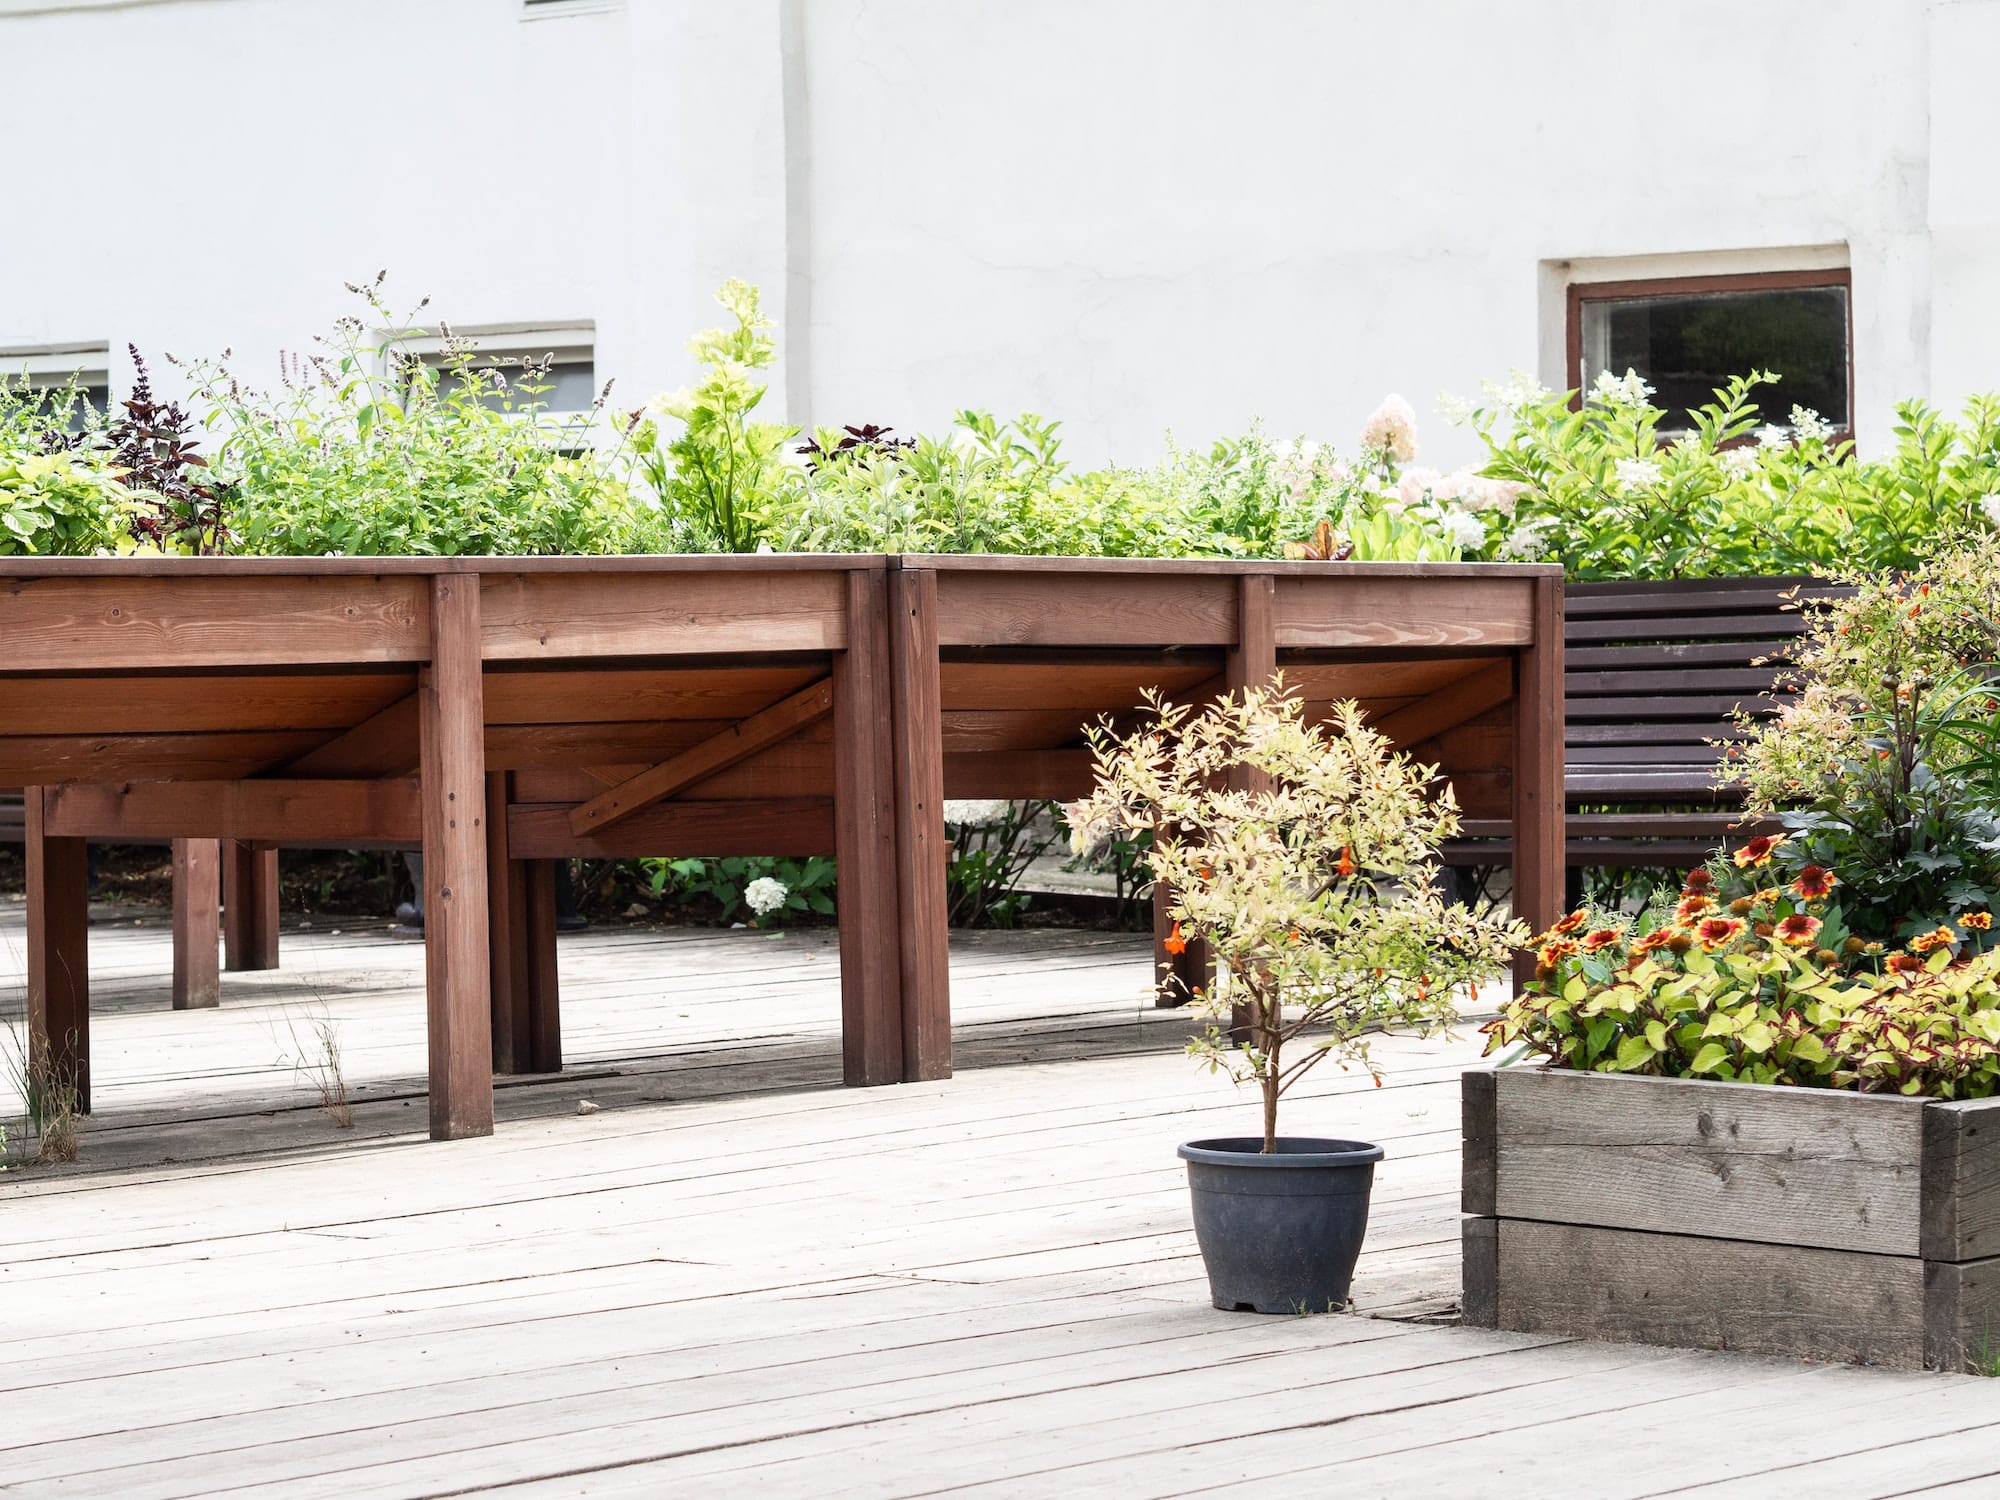 High raised wooden bed with various herbs in the city garden.